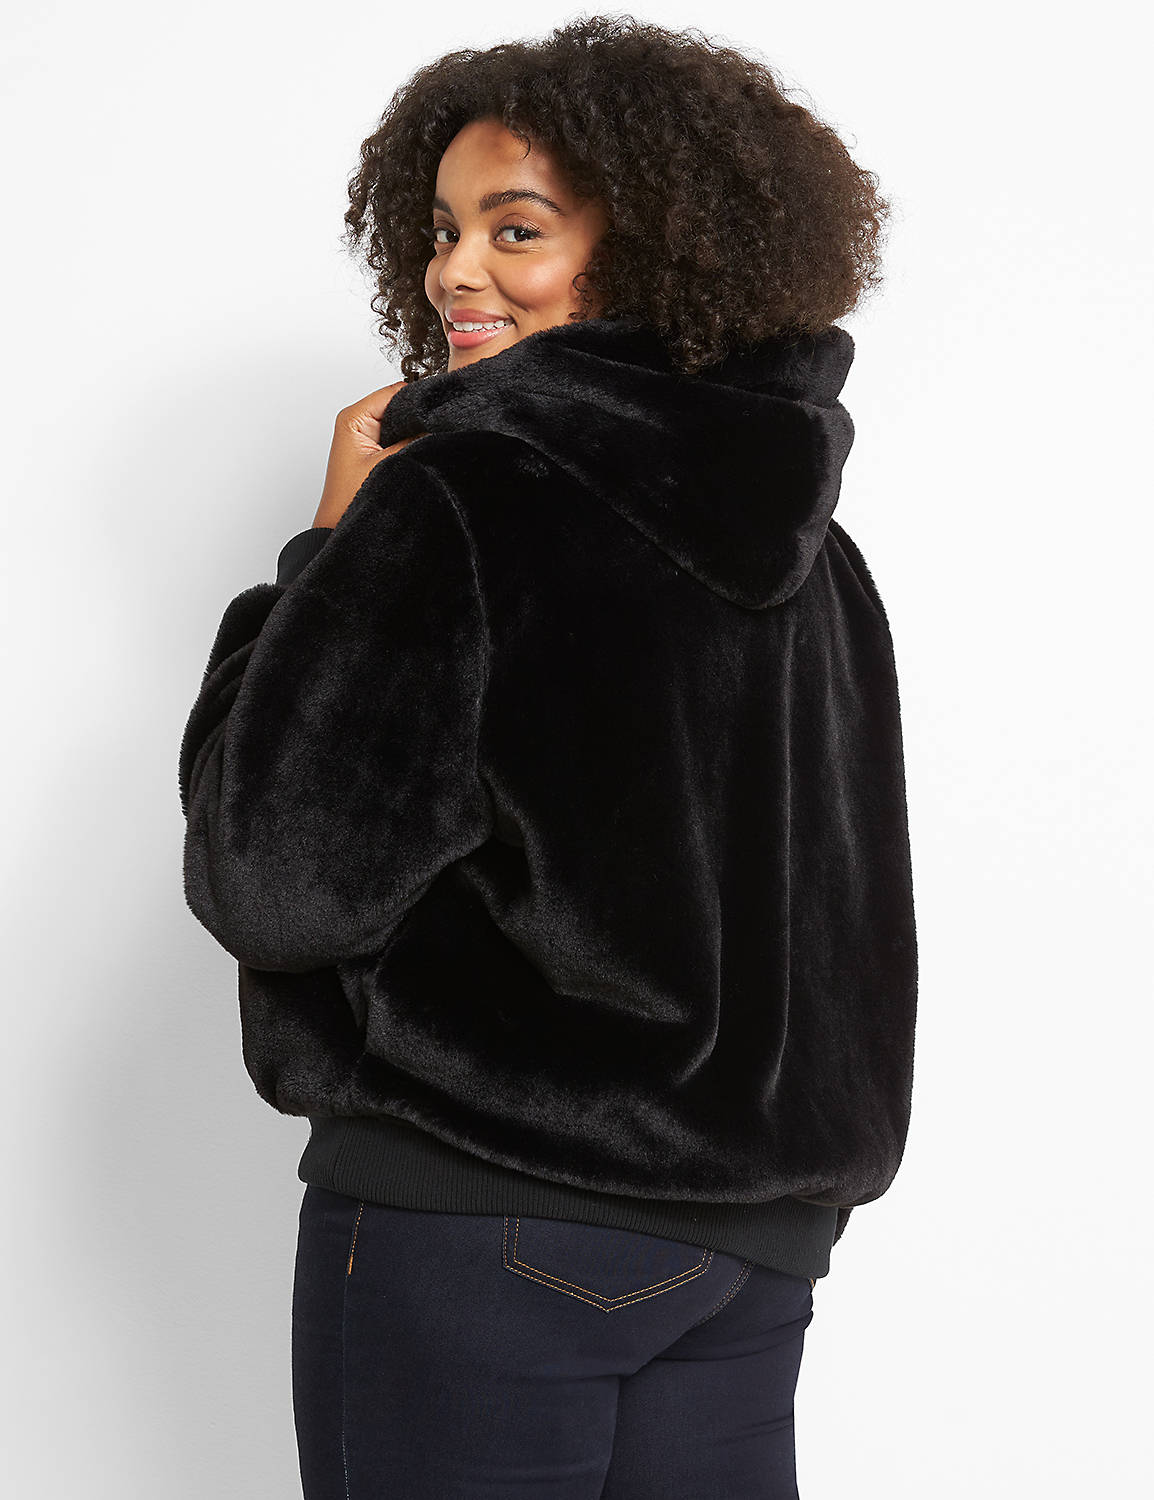 Hooded Faux Fur Coat 1123194 Product Image 2